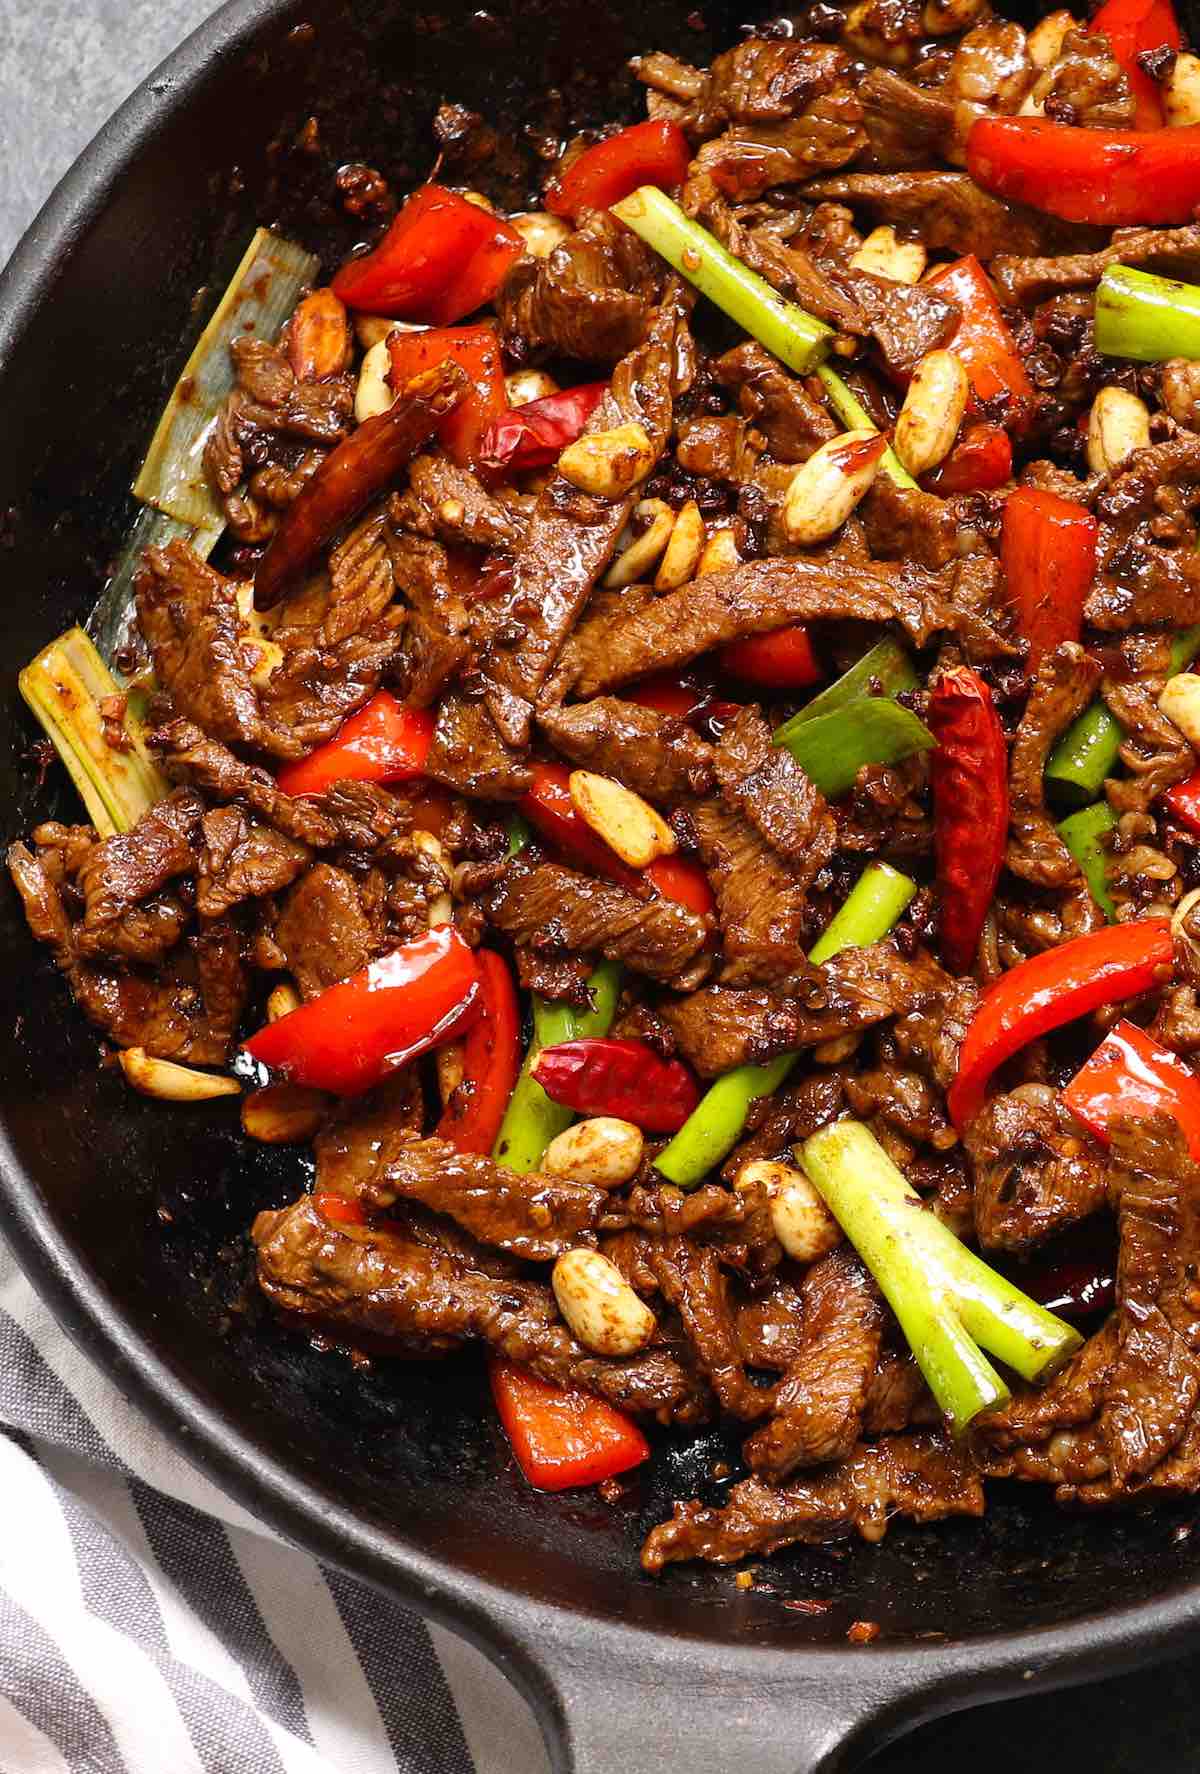 Stir fried Szechuan beef and vegetables in a cast iron skillet